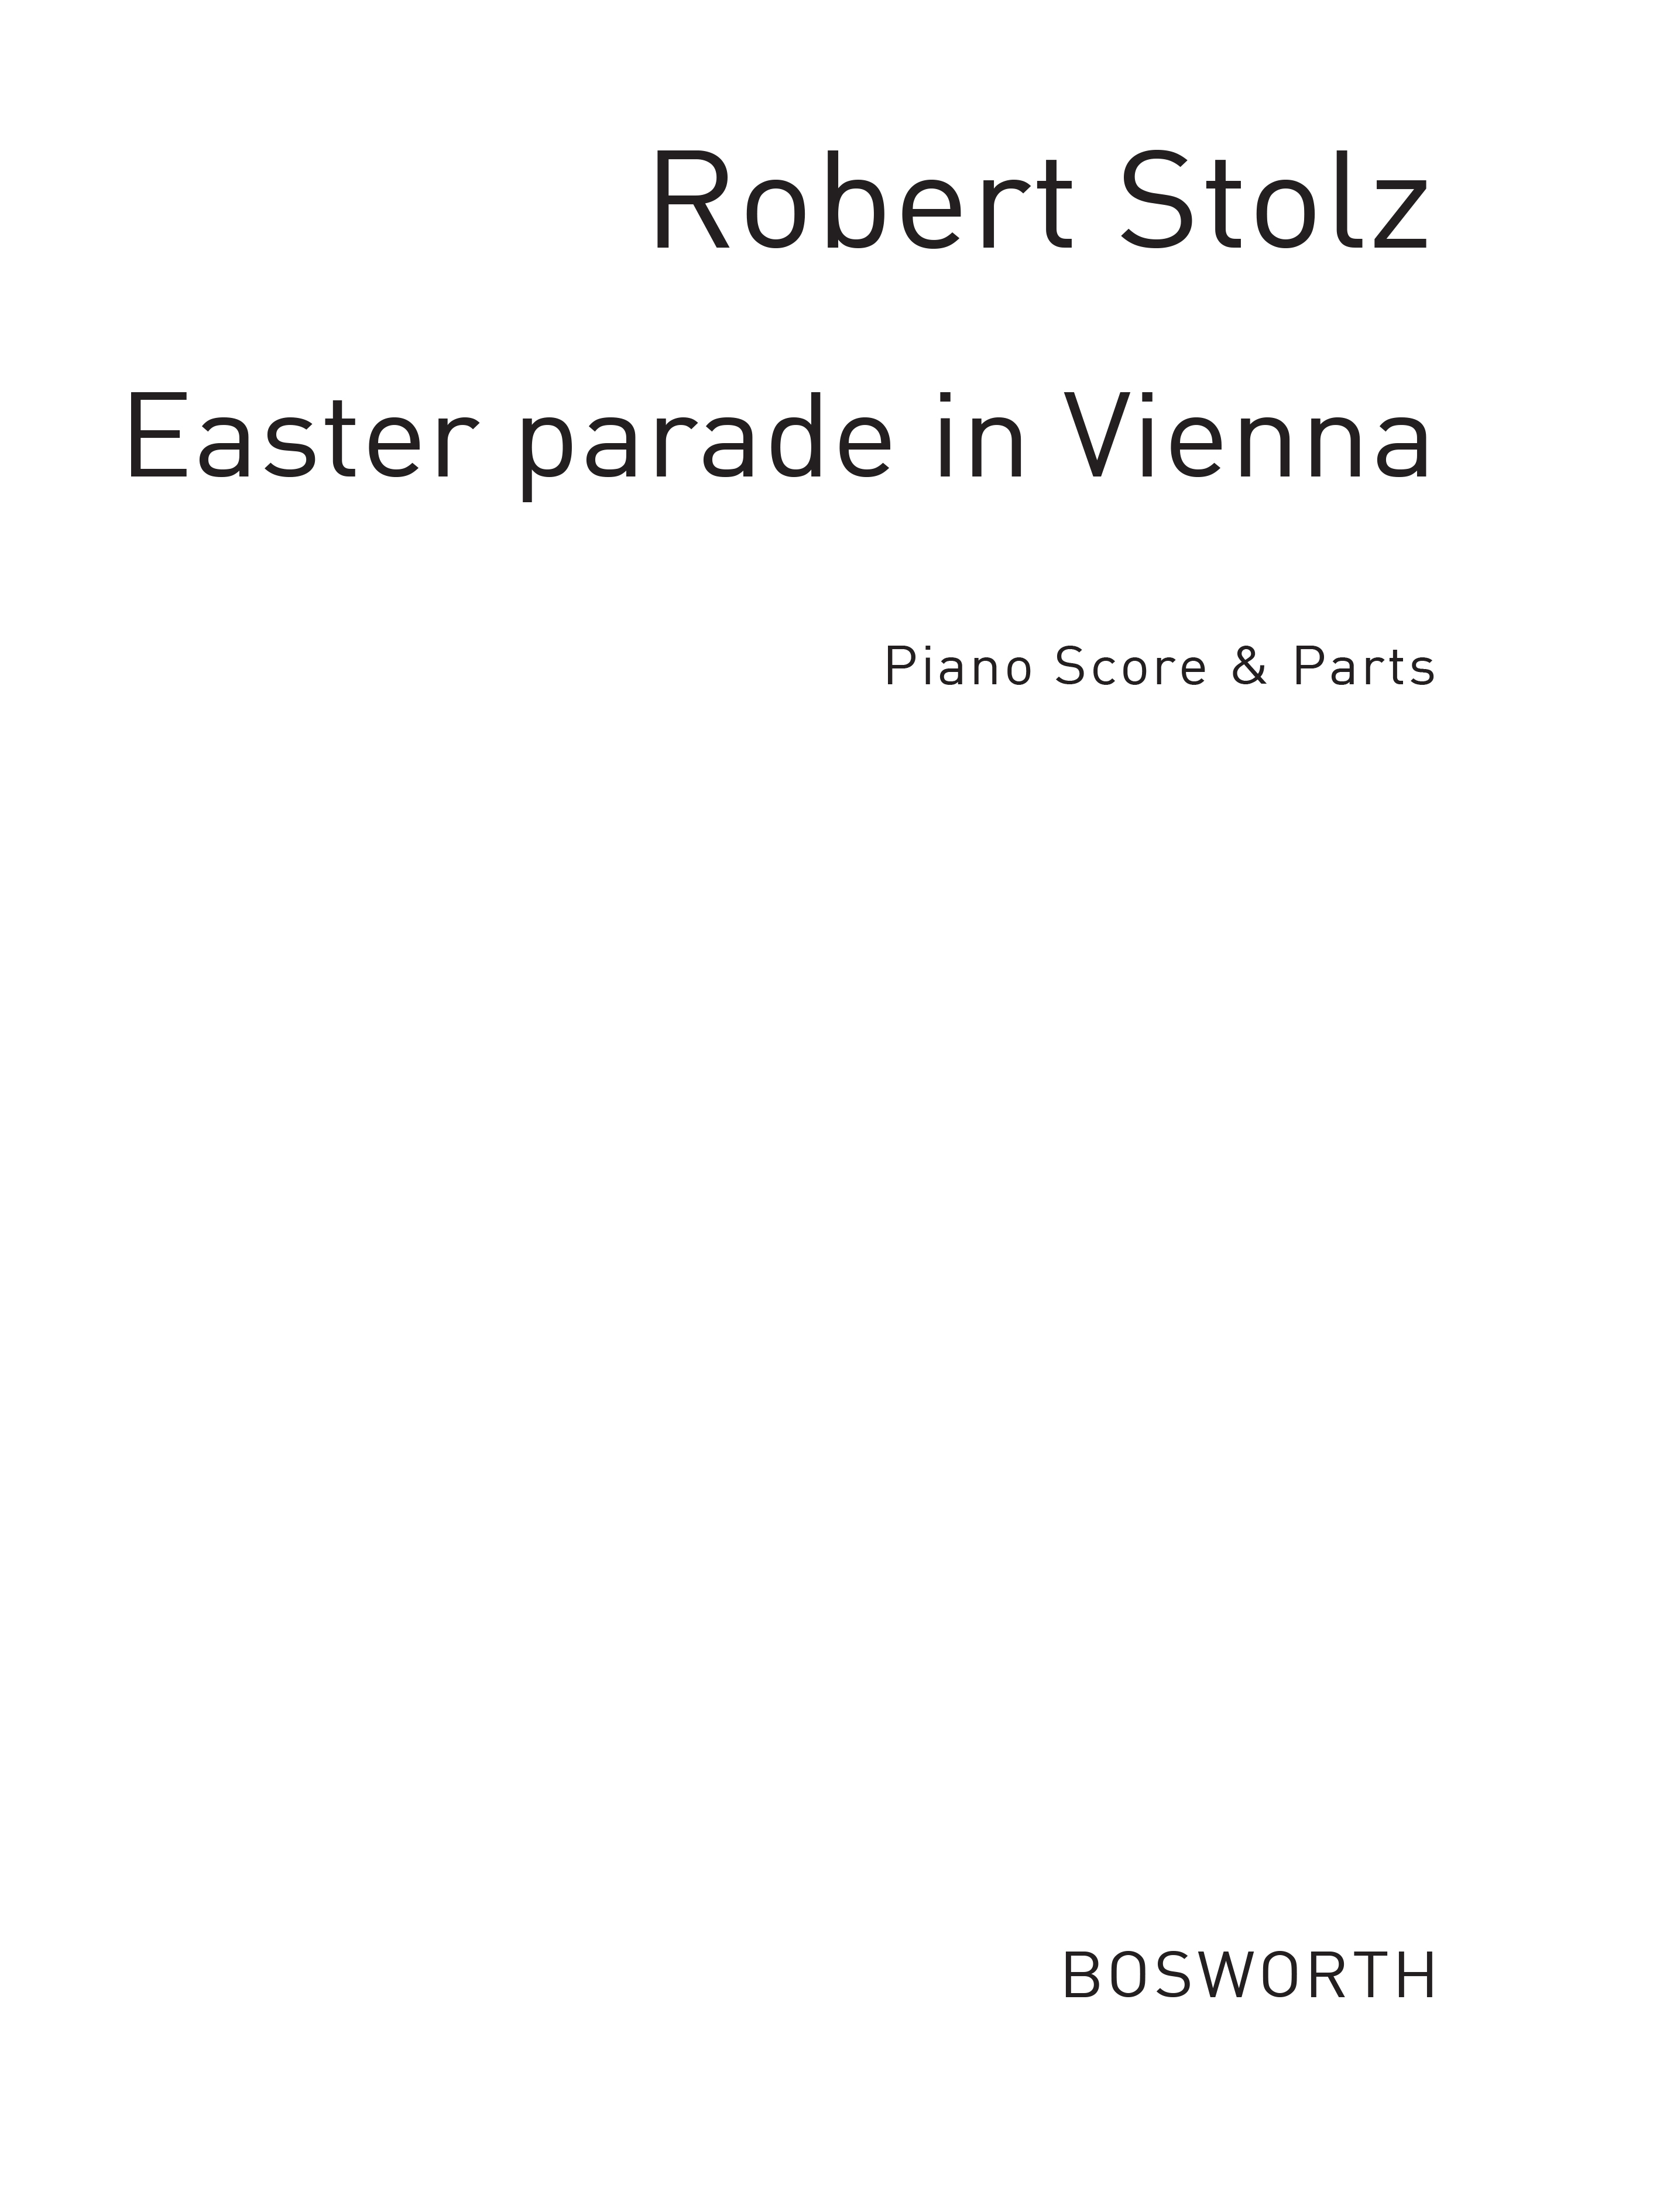 Stolz, R Easter Parade In Vienna Op.837 Orch Pf Sc/Pts